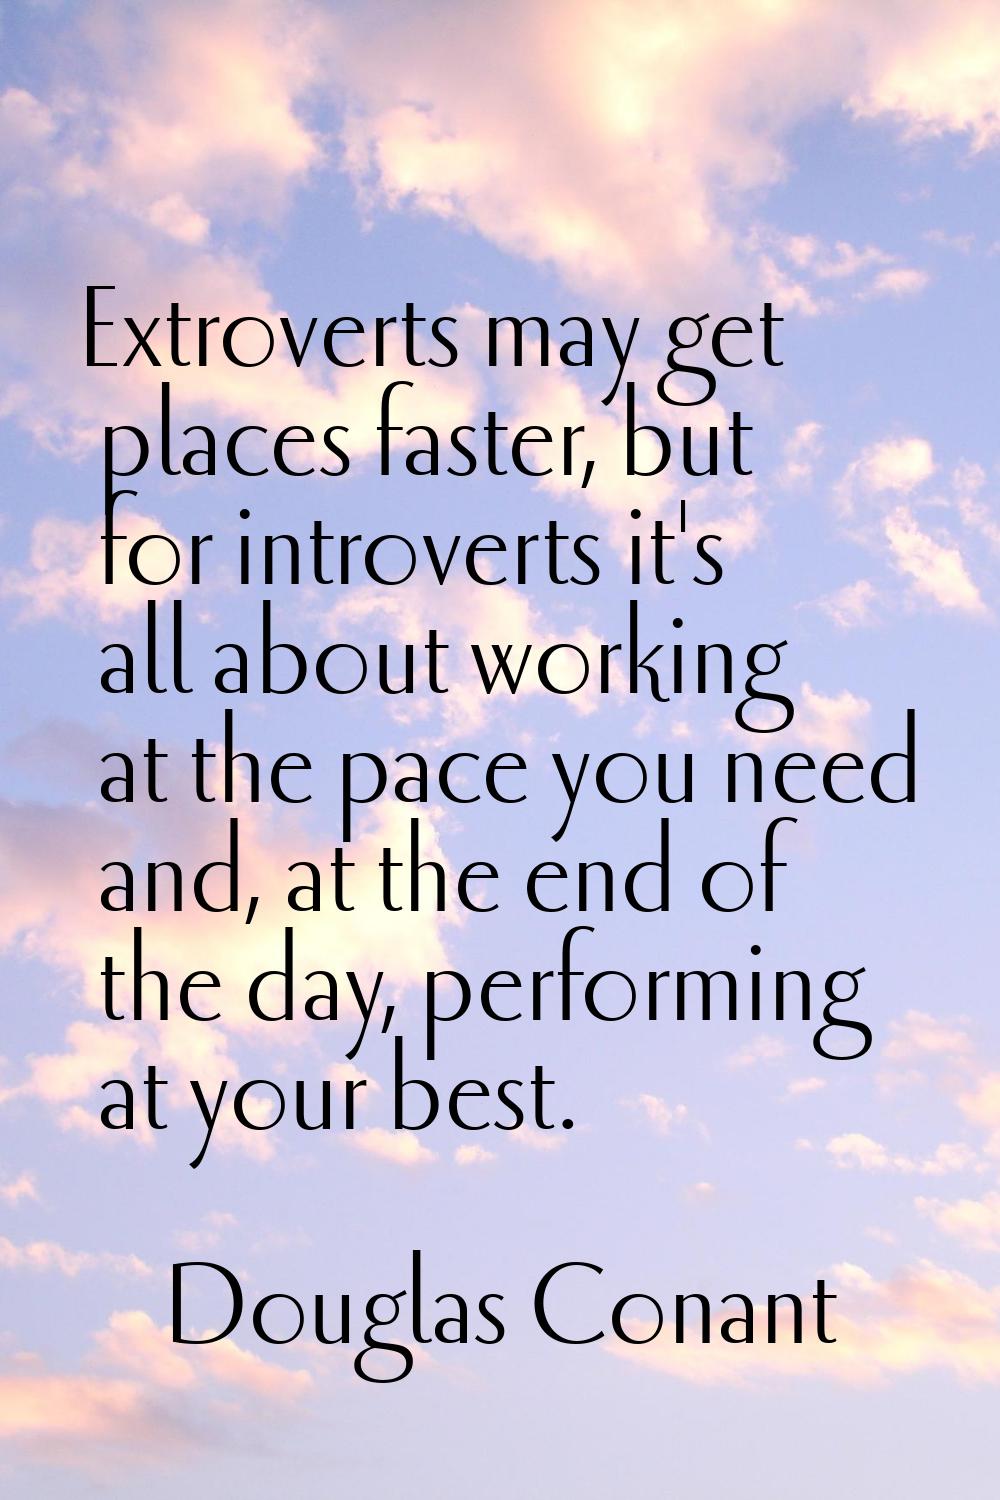 Extroverts may get places faster, but for introverts it's all about working at the pace you need an